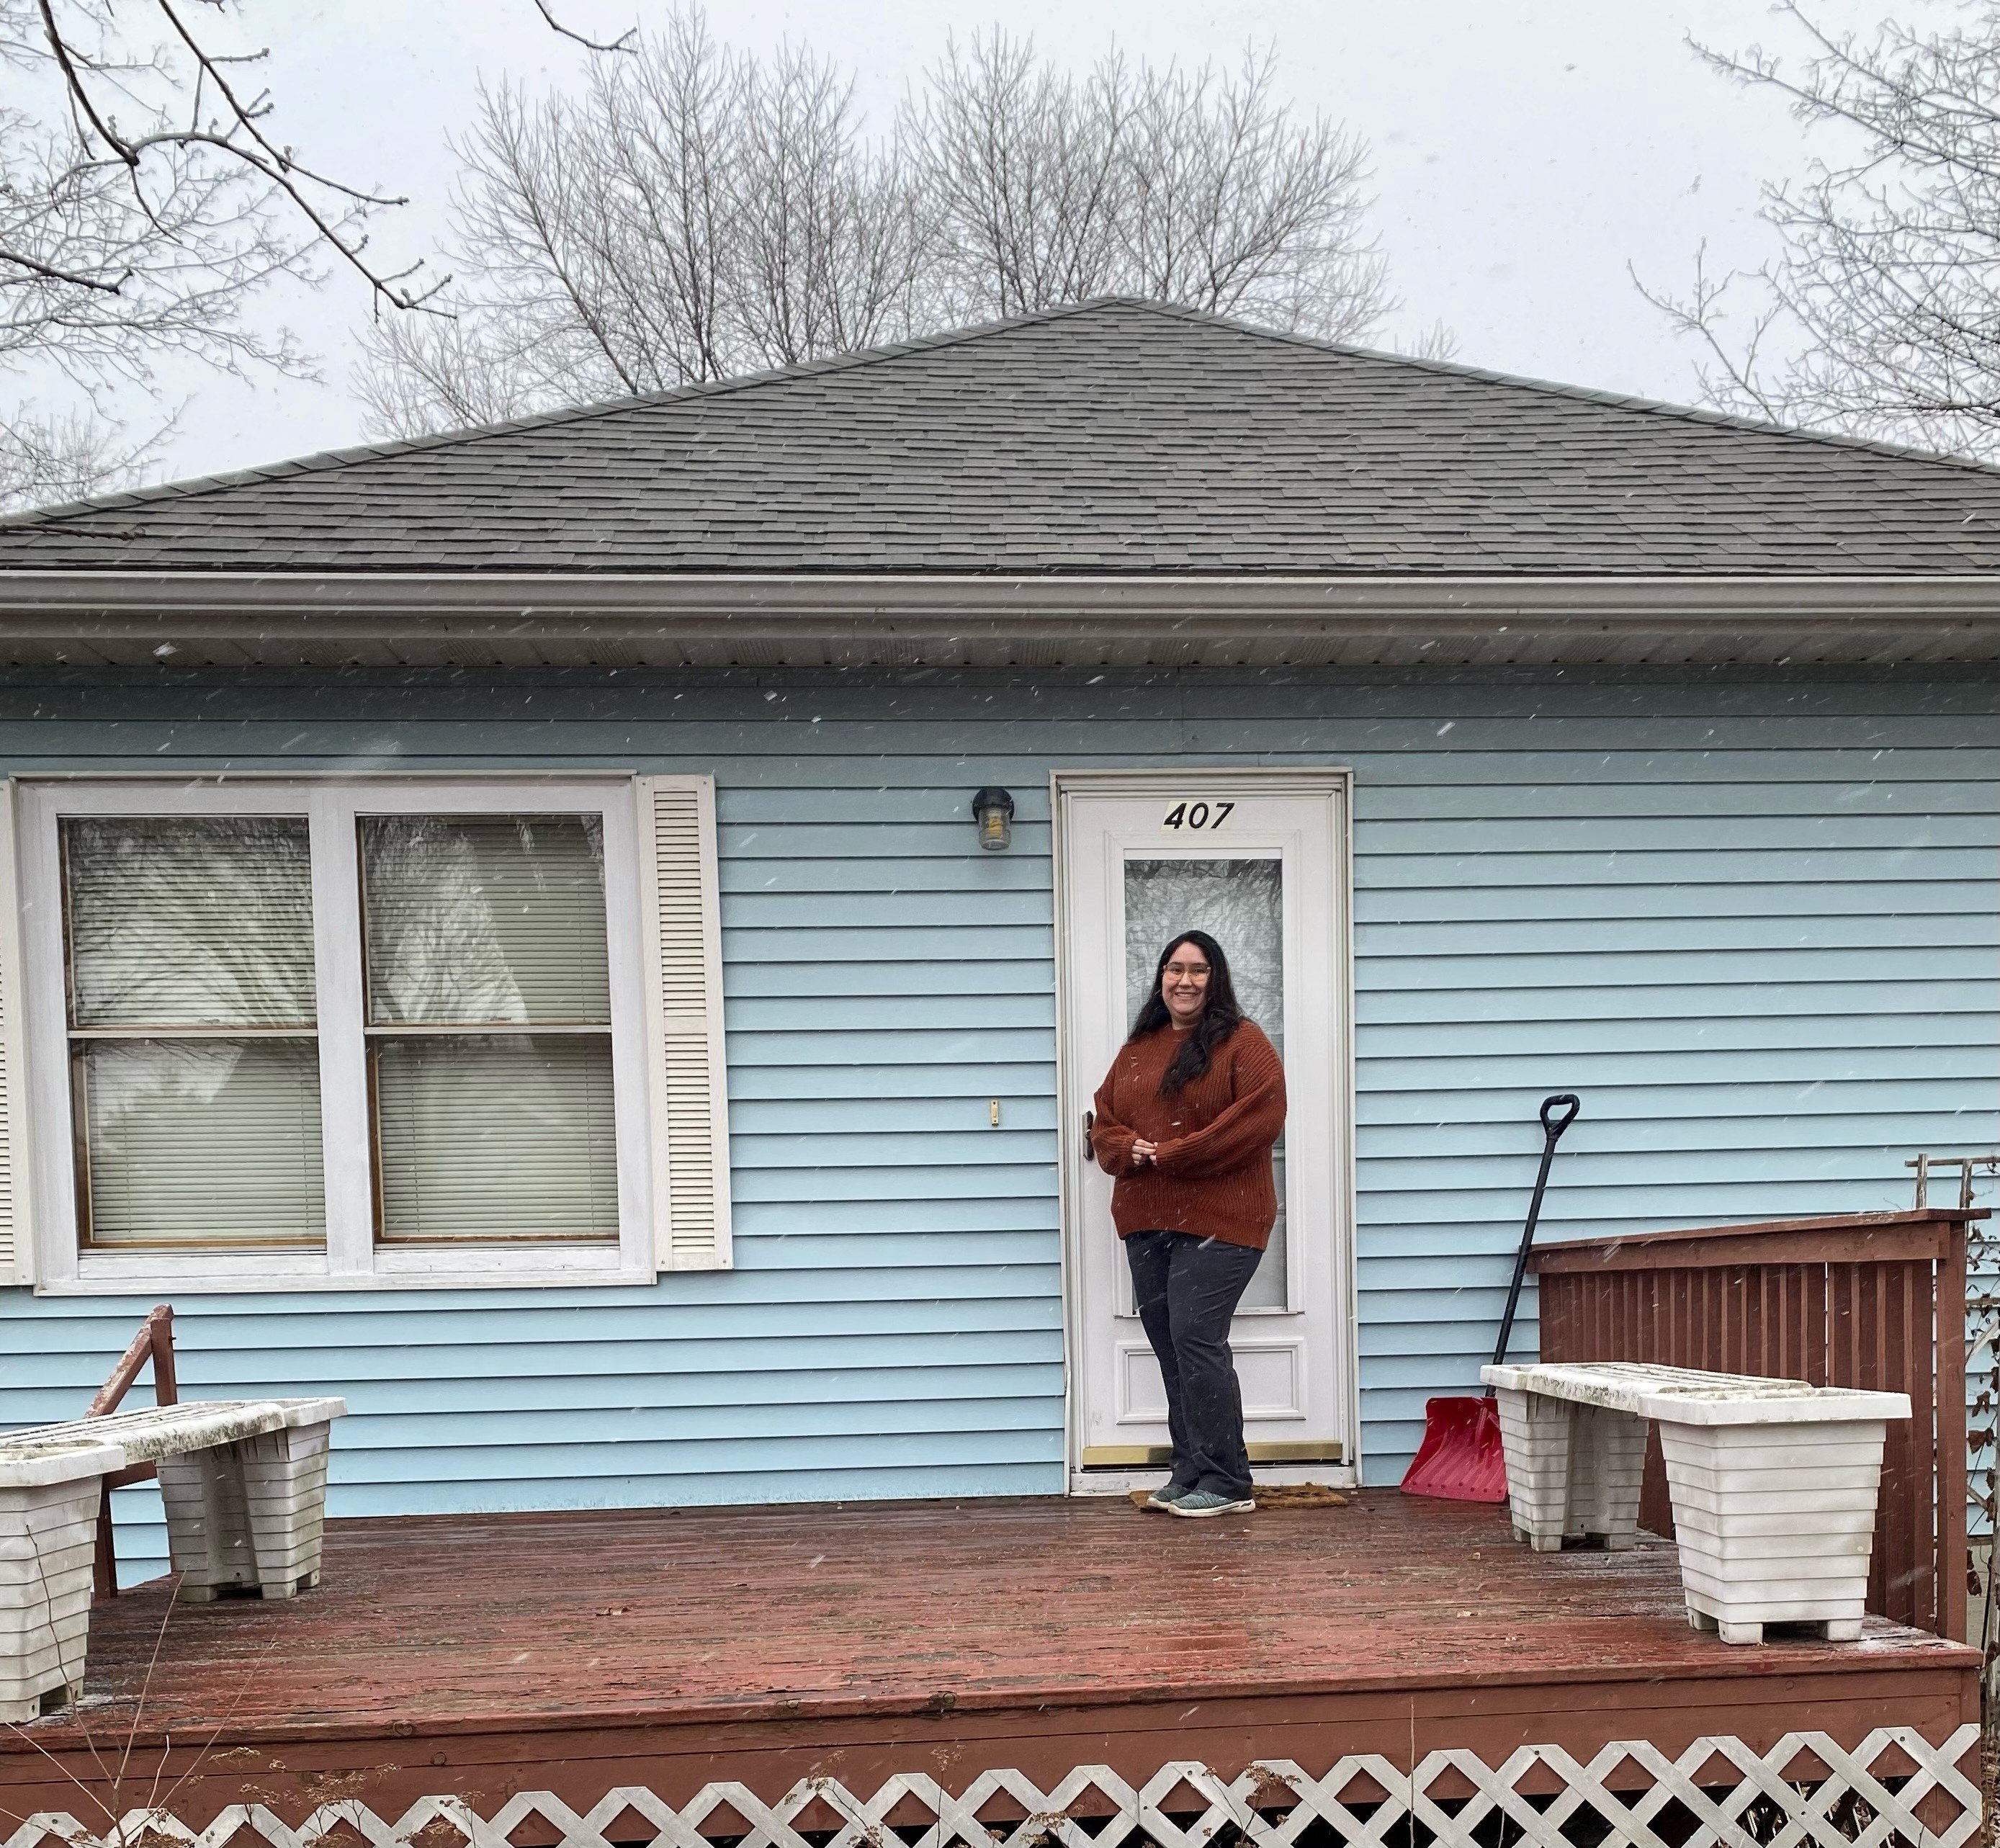 April and her mother: A tale of two first-time homebuyers